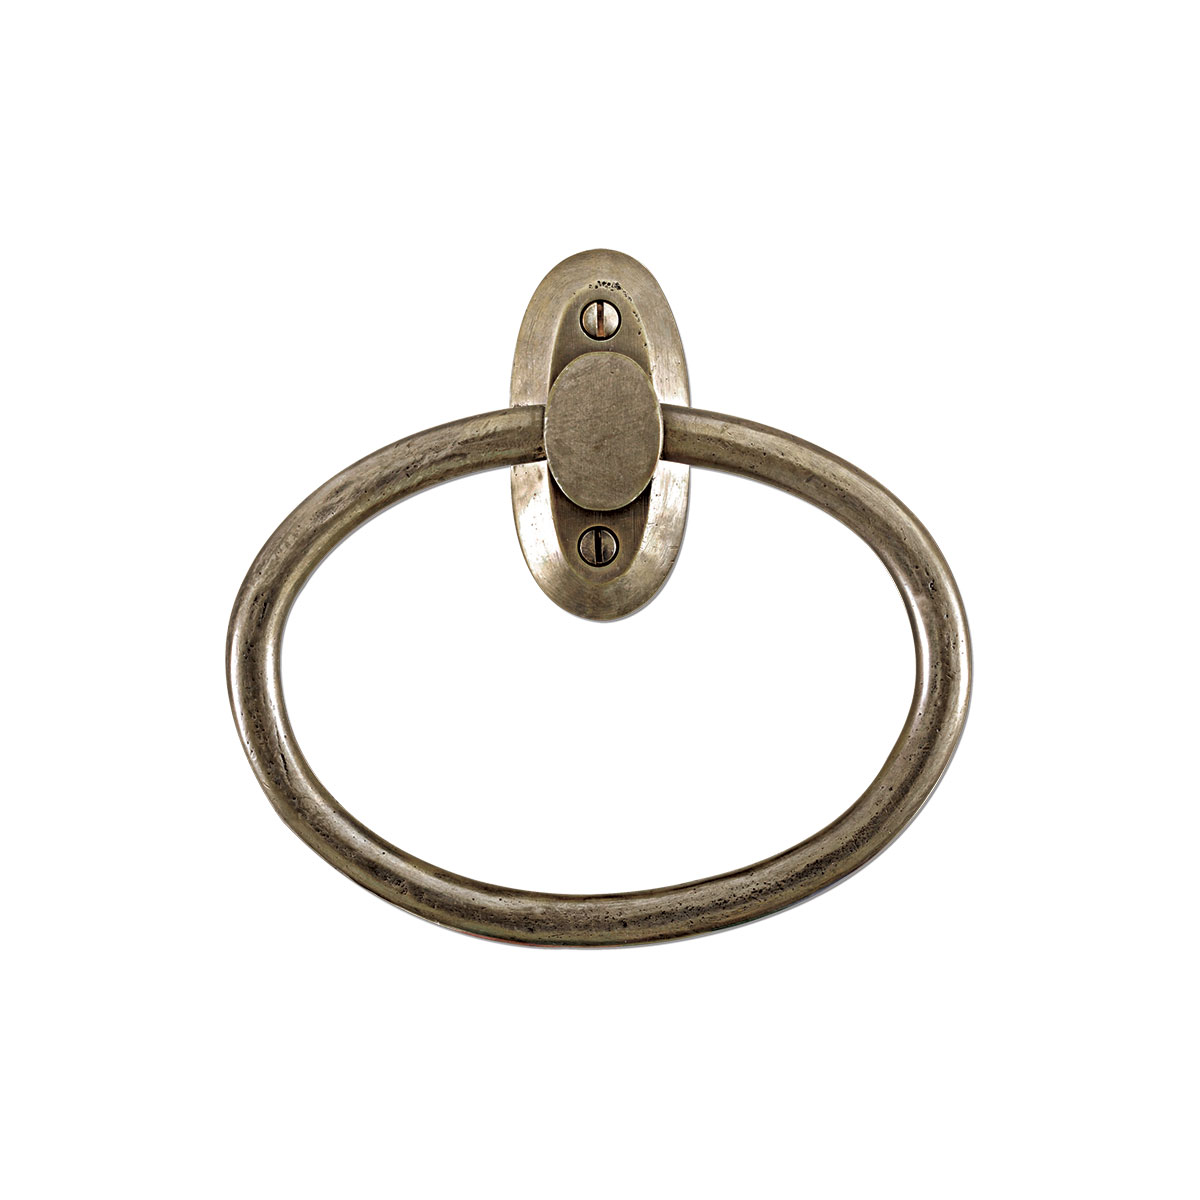 Solid Bronze Oval Towel Ring 